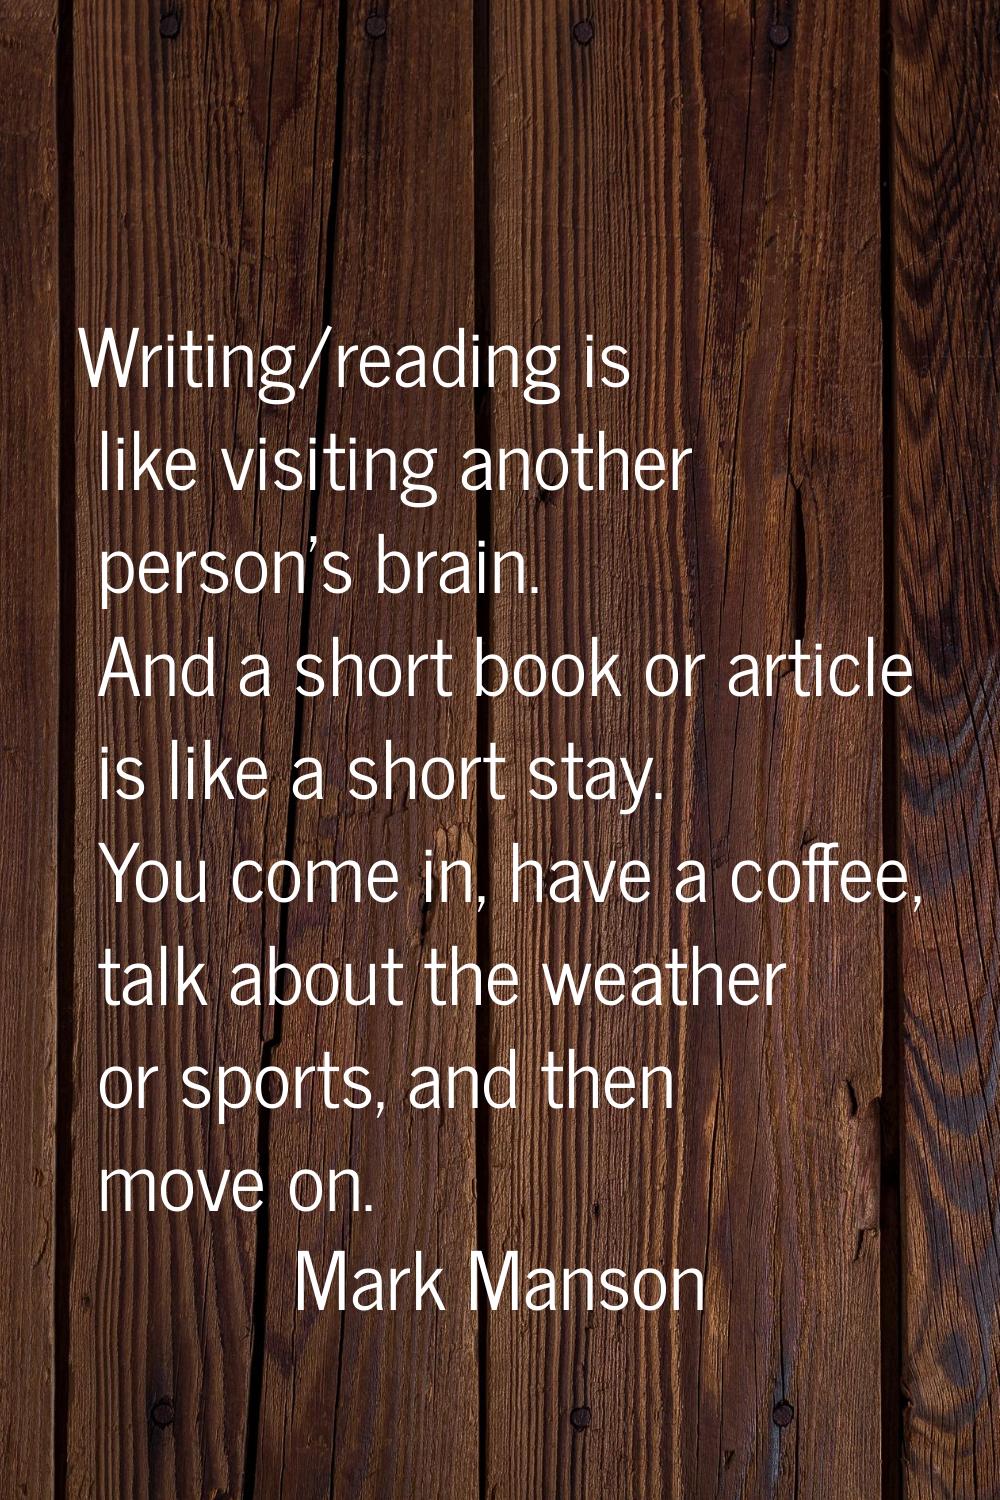 Writing/reading is like visiting another person's brain. And a short book or article is like a shor